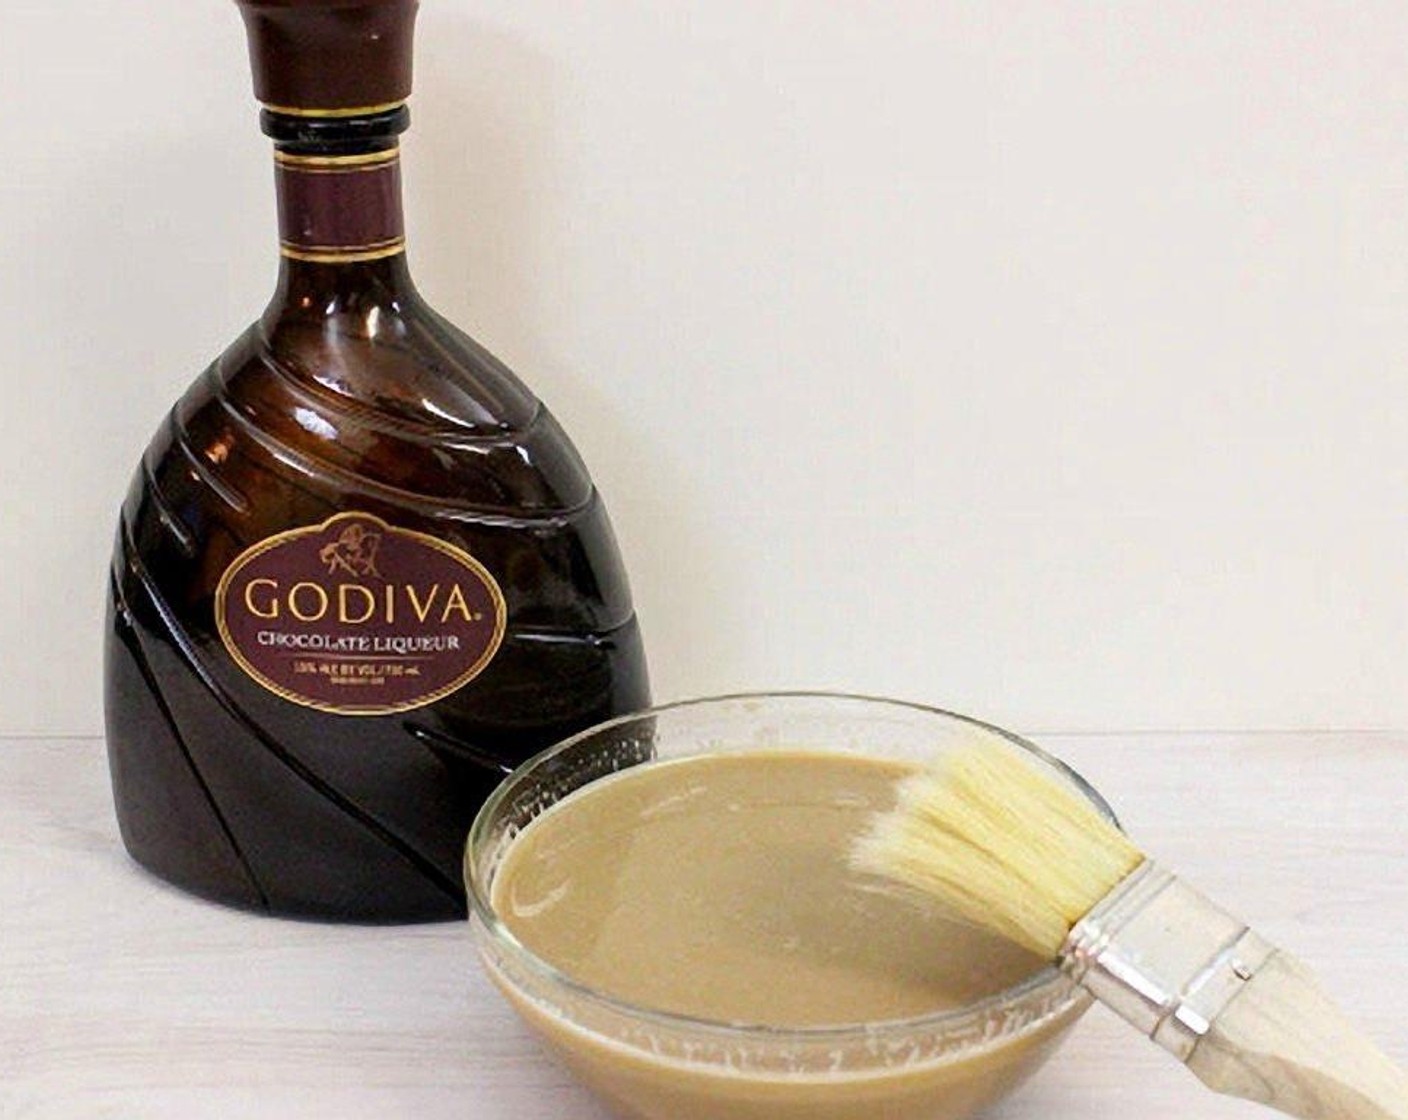 step 18 For the syrup: In a small saucepan, combine the Water (1/2 cup), Granulated Sugar (1/3 cup), and Chocolate Liqueur (1/2 cup) and cook over medium-hot heat until the sugar melts. Remove from the heat and let cool.